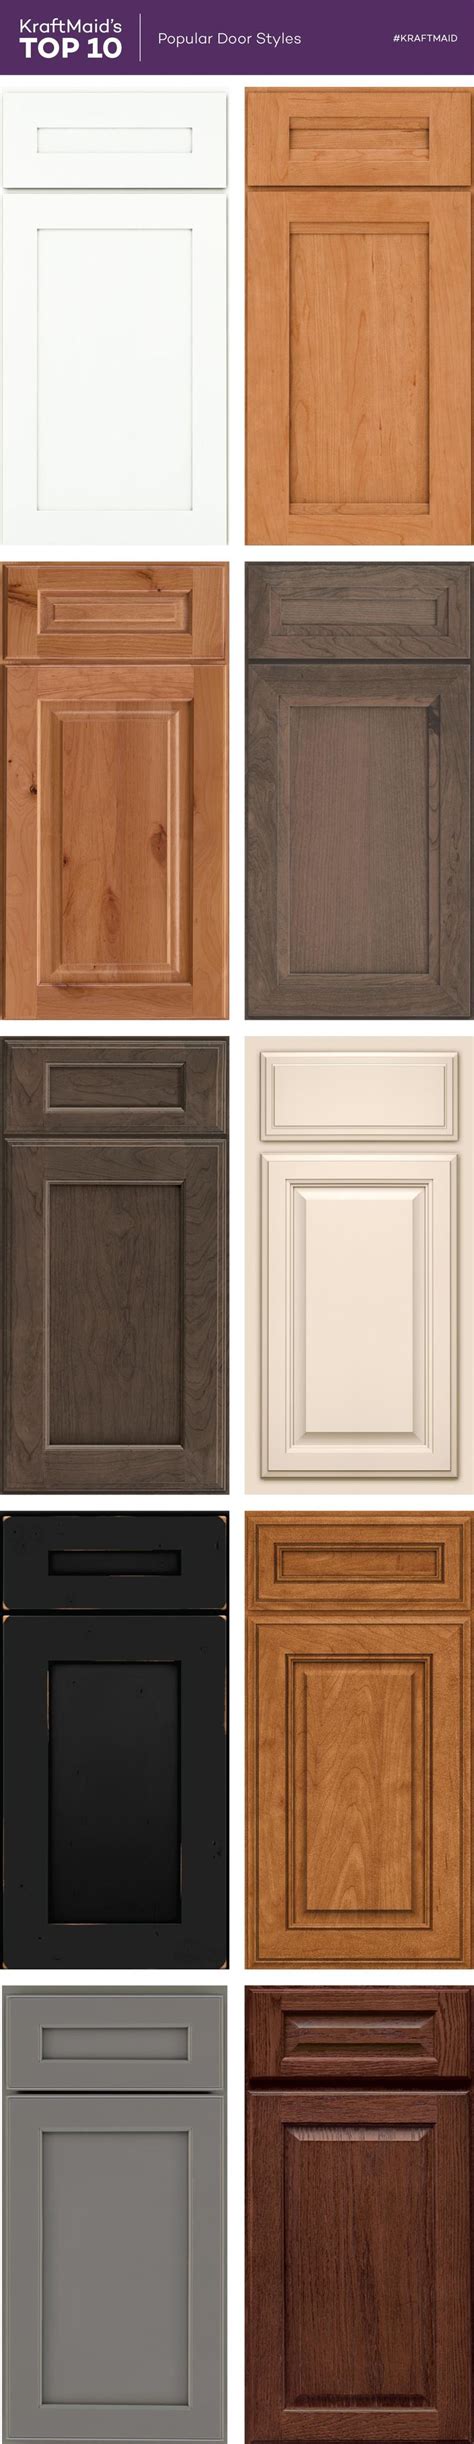 Kraftmaid Shaker And Transitional Style Kitchen Cabinet Doors Are